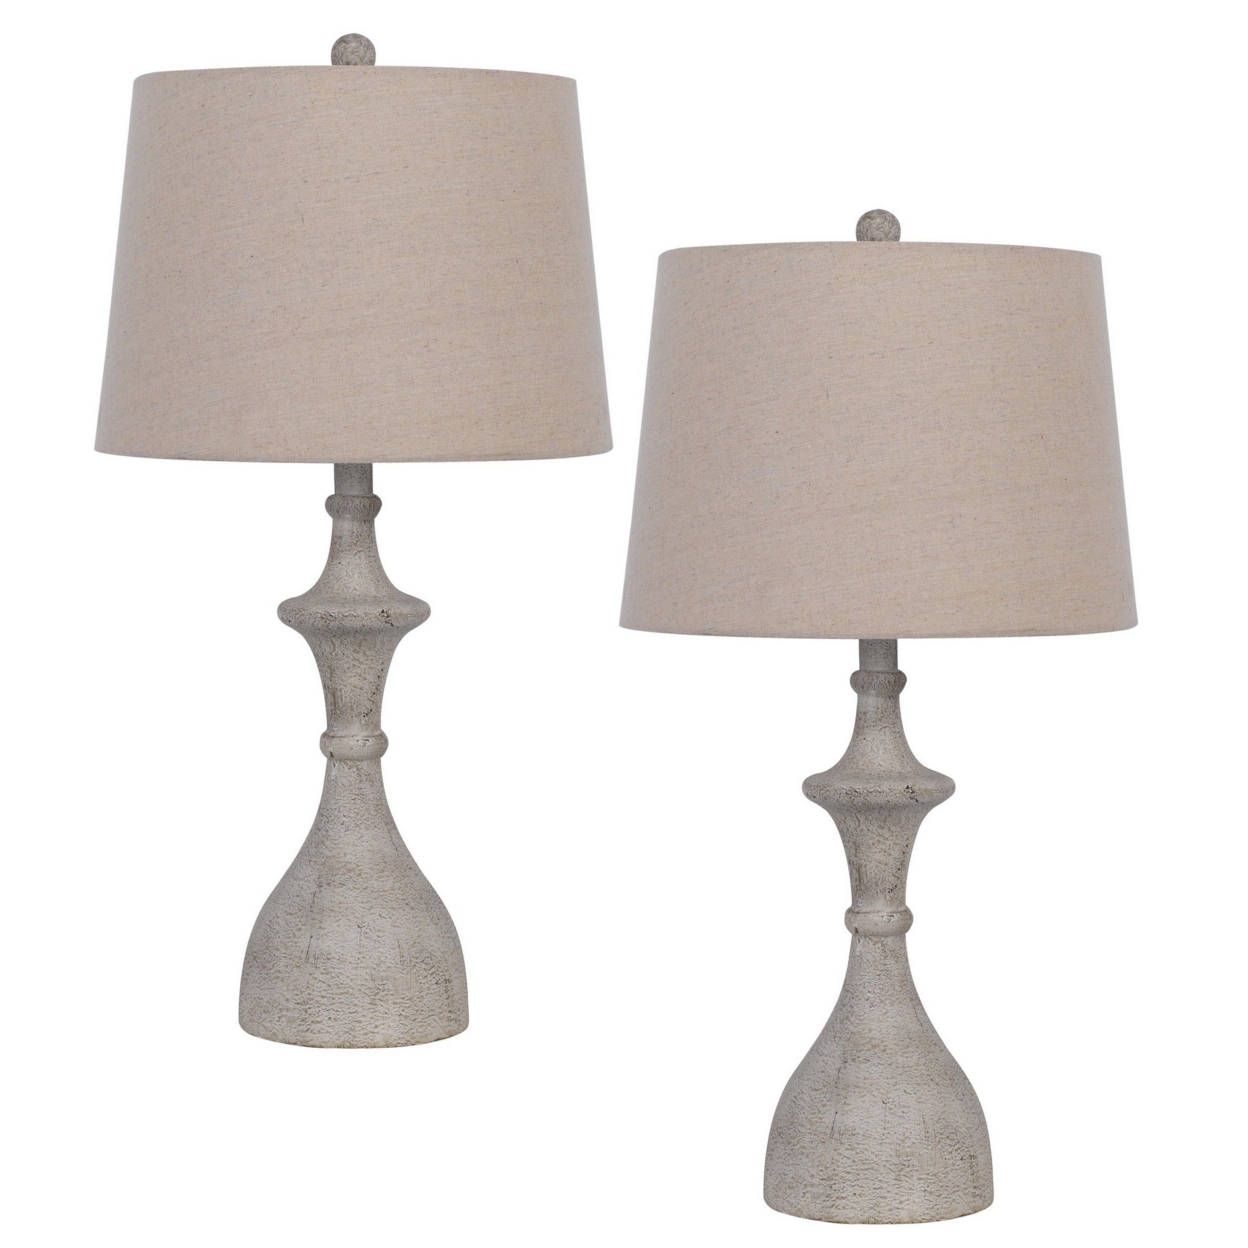 27 Inch Set Of 2 Classic Resin Accent Table Lamp, Turned, Beige Rustic Gray- Saltoro Sherpi